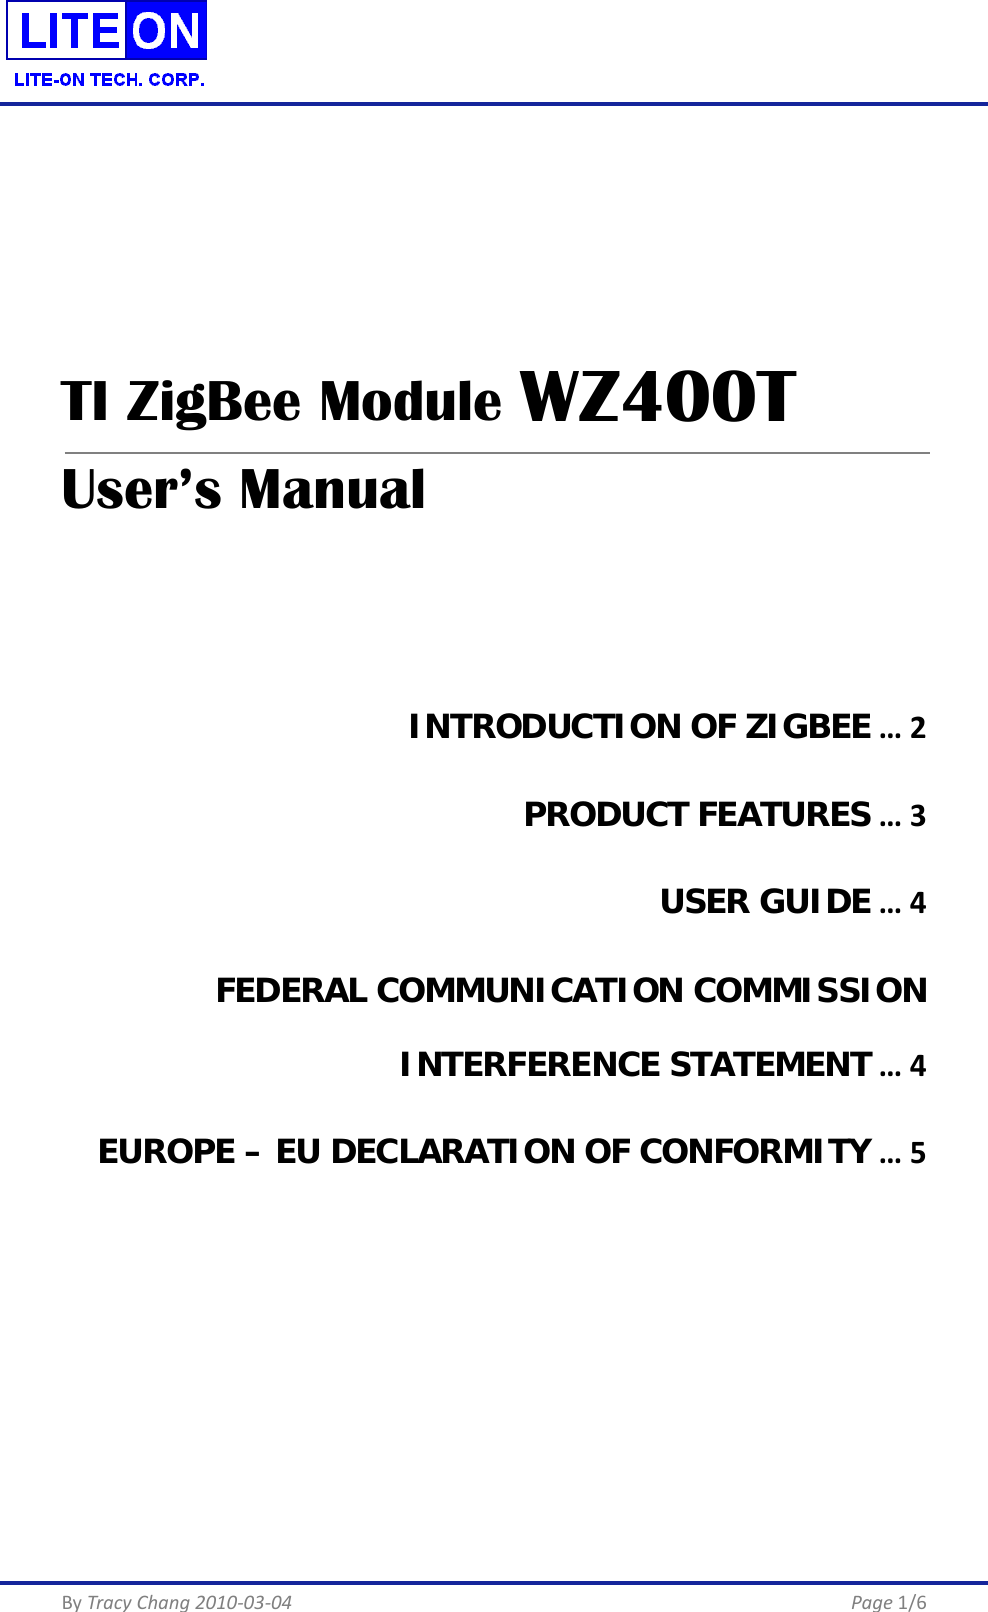  By Tracy Chang 2010-03-04      Page 1/6    TI ZigBee Module WZ400T User’s Manual   INTRODUCTION OF ZIGBEE … 2 PRODUCT FEATURES … 3 USER GUIDE … 4 FEDERAL COMMUNICATION COMMISSION INTERFERENCE STATEMENT … 4 EUROPE – EU DECLARATION OF CONFORMITY … 5     